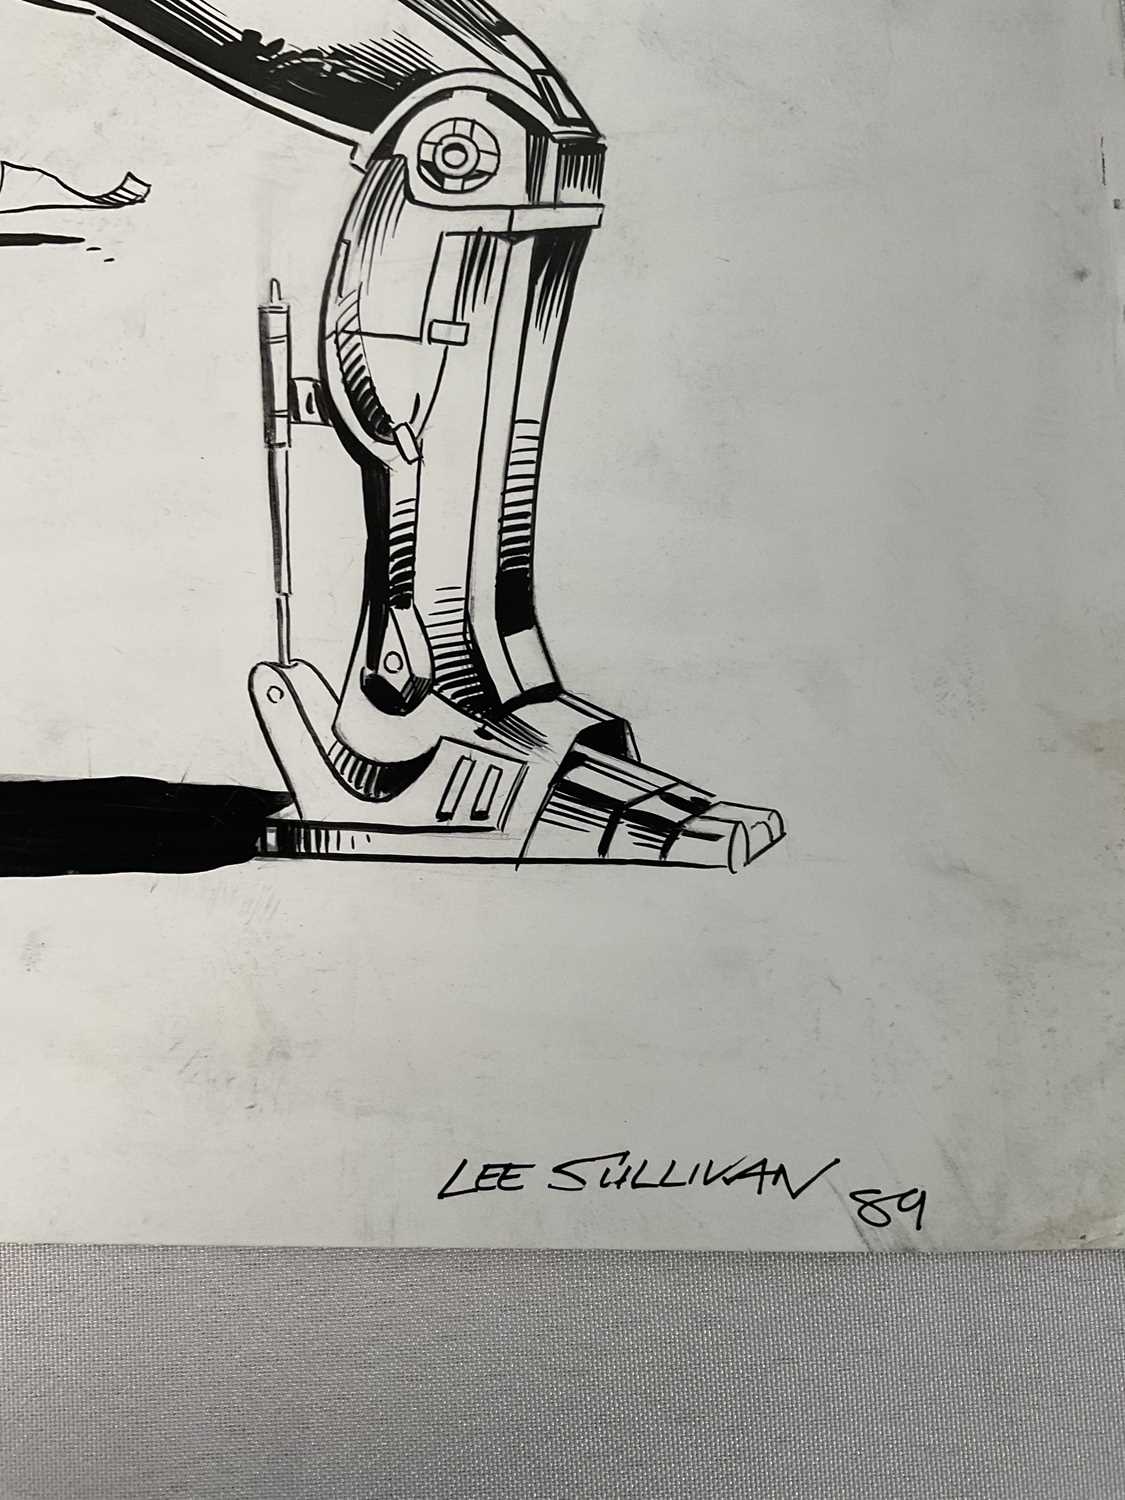 Original Comic Book Artwork - A LEE SULLIVAN drawing for an audition to work on the ROBOCOP comic - Image 2 of 2